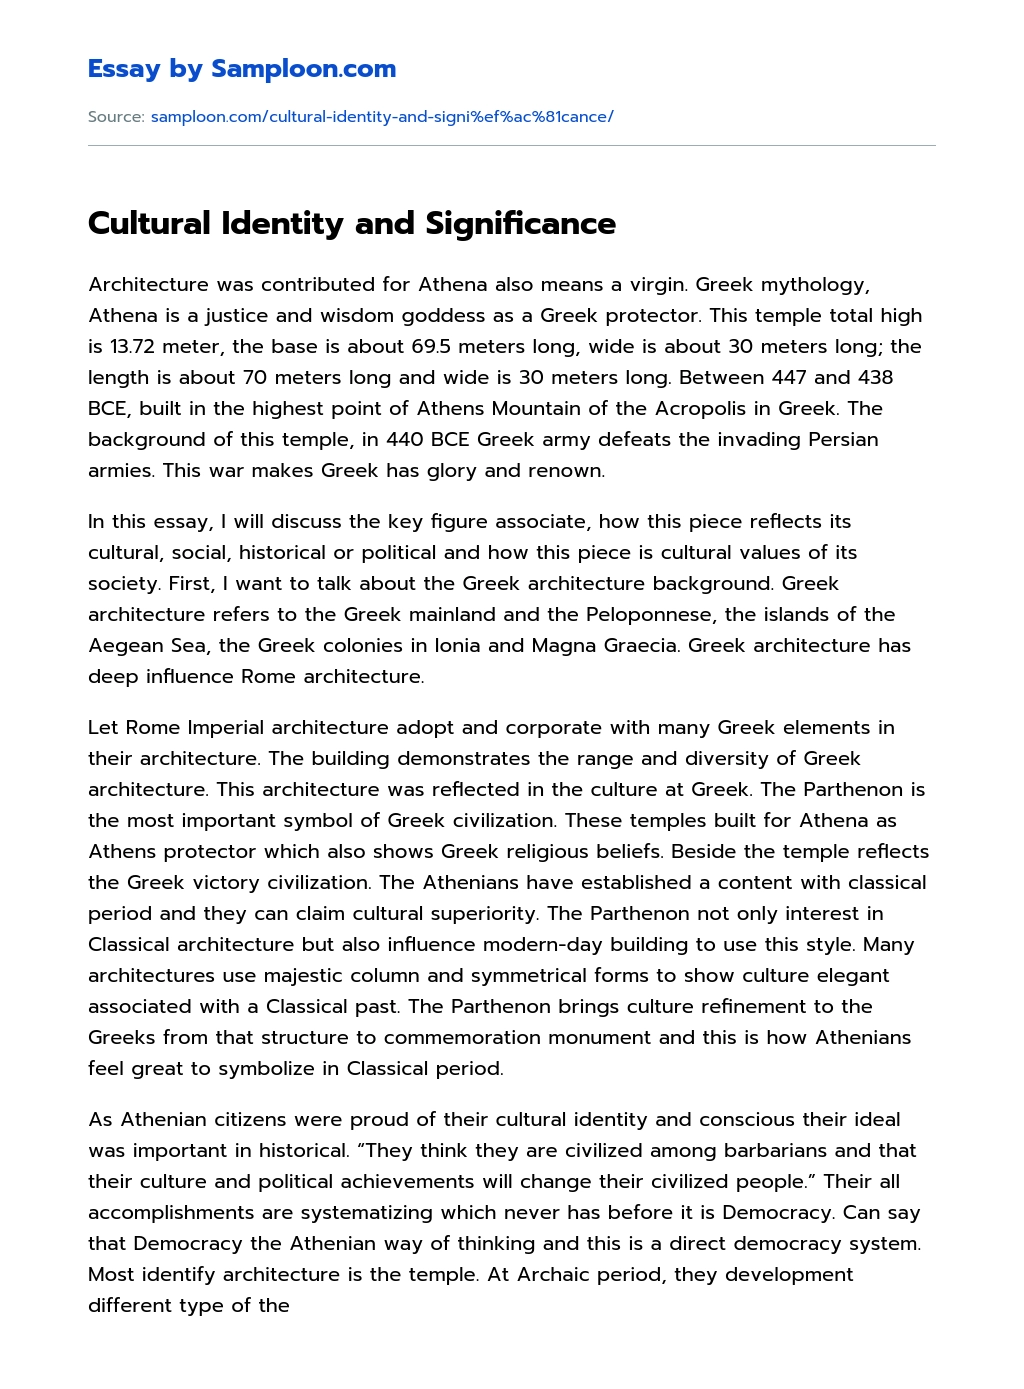 Cultural Identity and Signiﬁcance essay